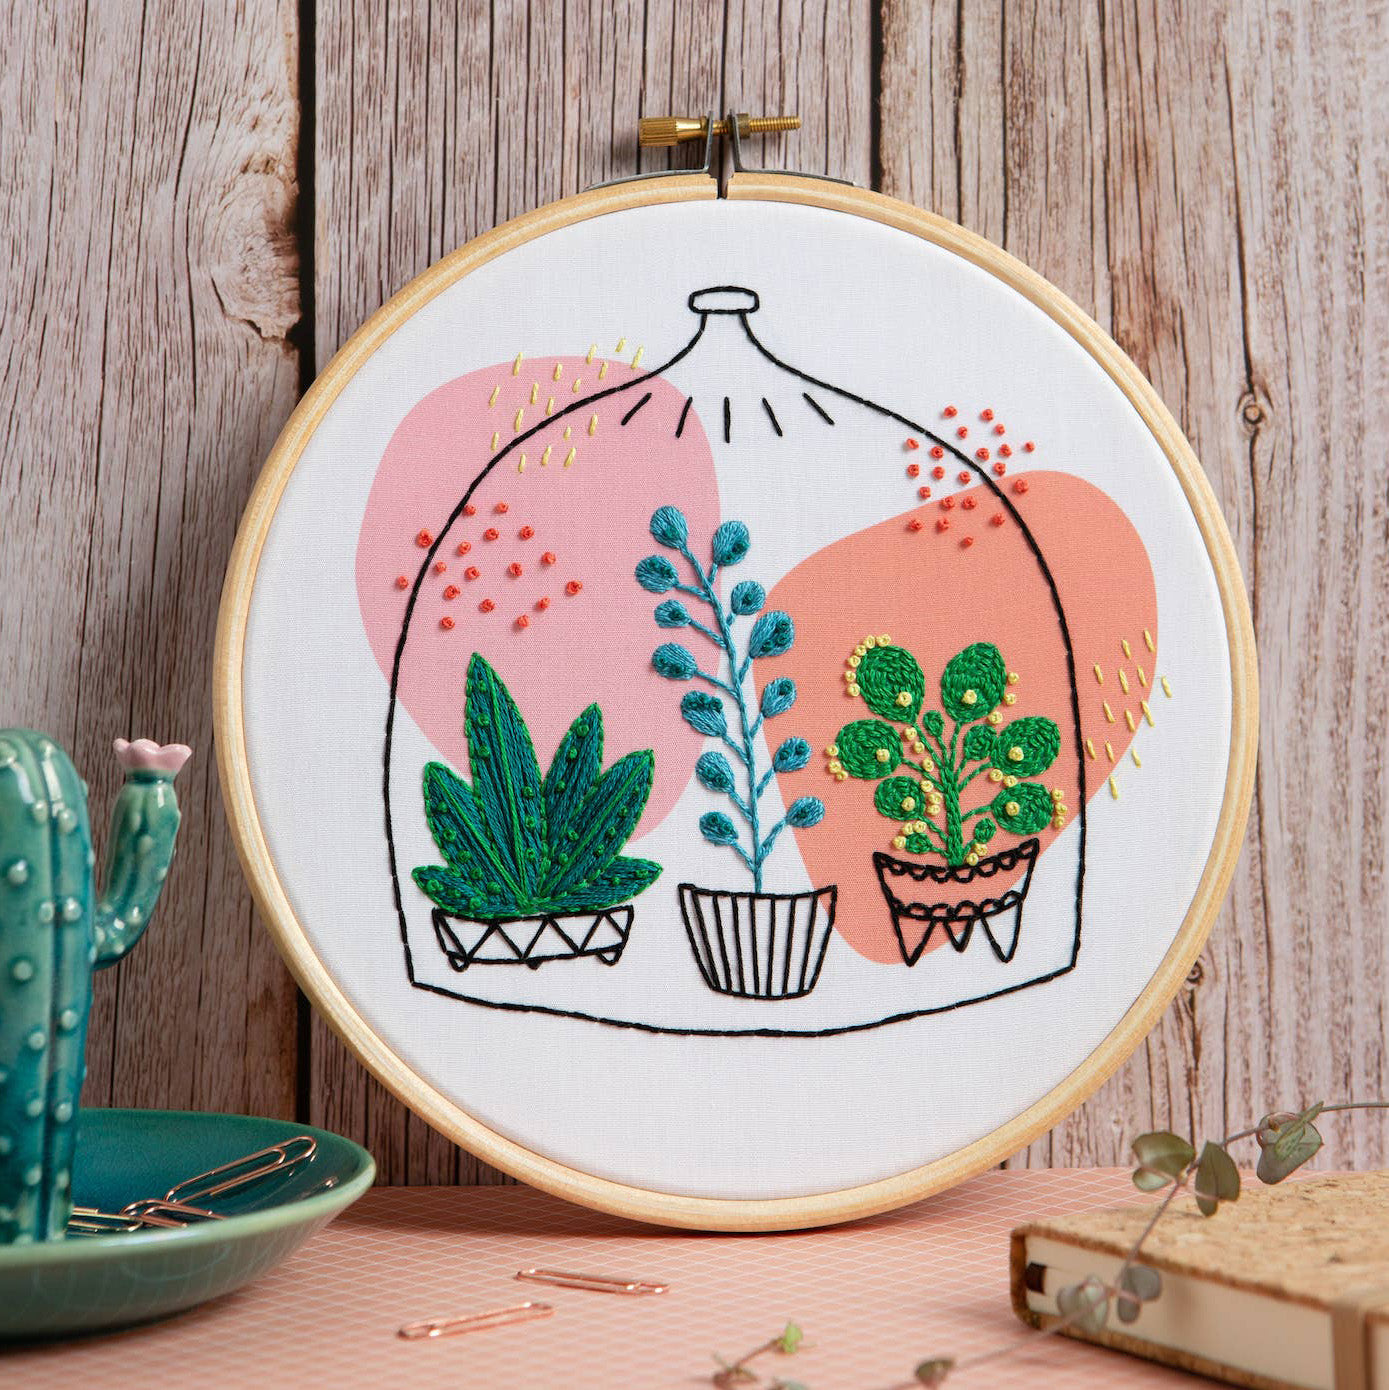 The Art of The Needle 'In the Garden' Embroidery Kit